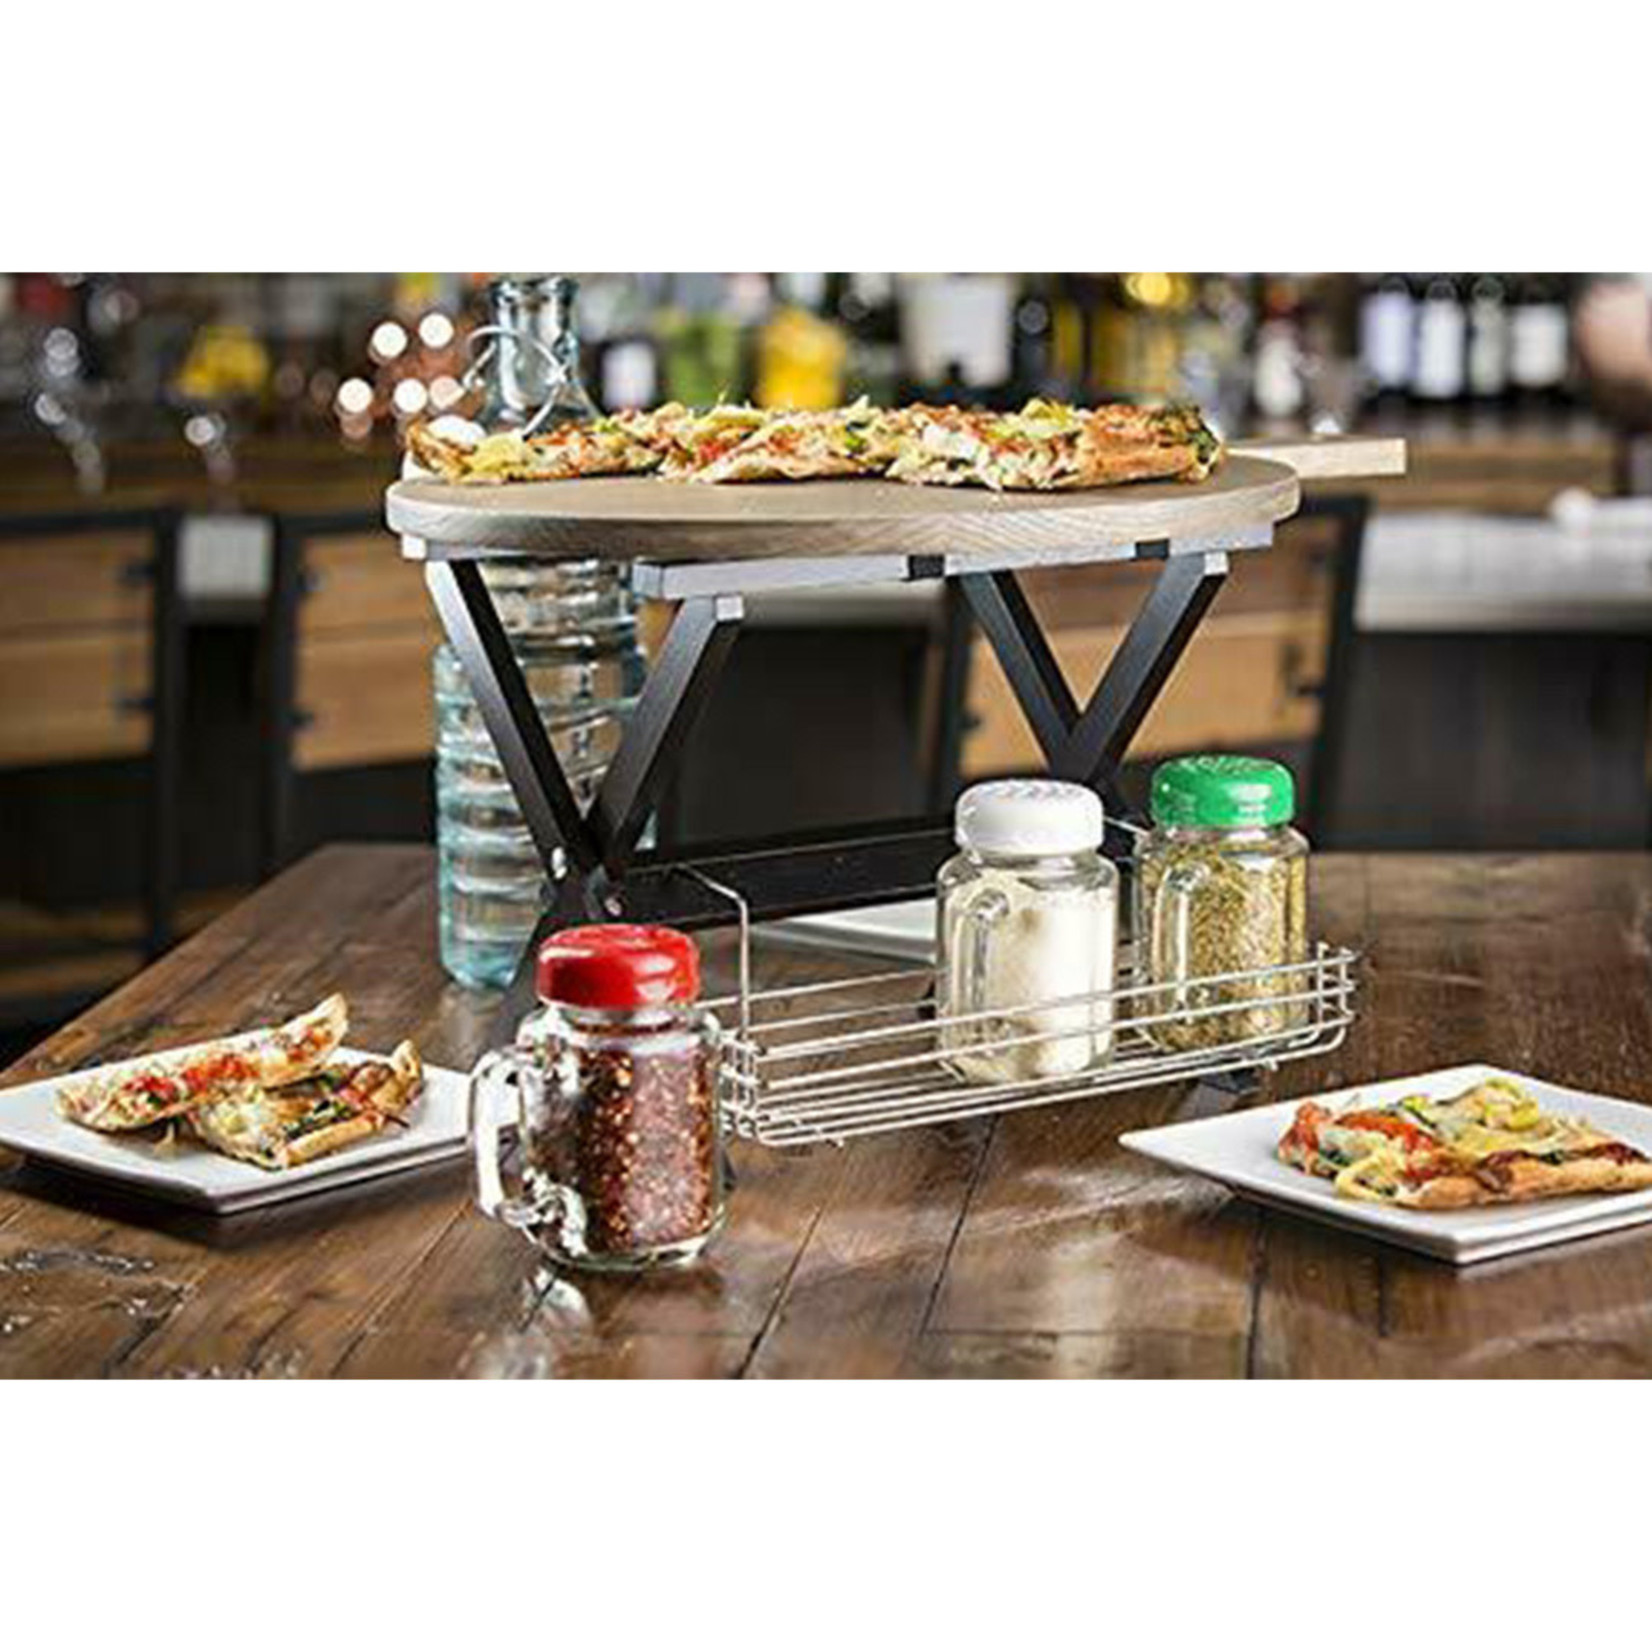 Ashwood Pizza Jars, Mini Kit, Includes: Stand, - Cutter Rack, The Paddle Fancy Mason Boutique 8oz (3) Round Pizza Frog Tray &